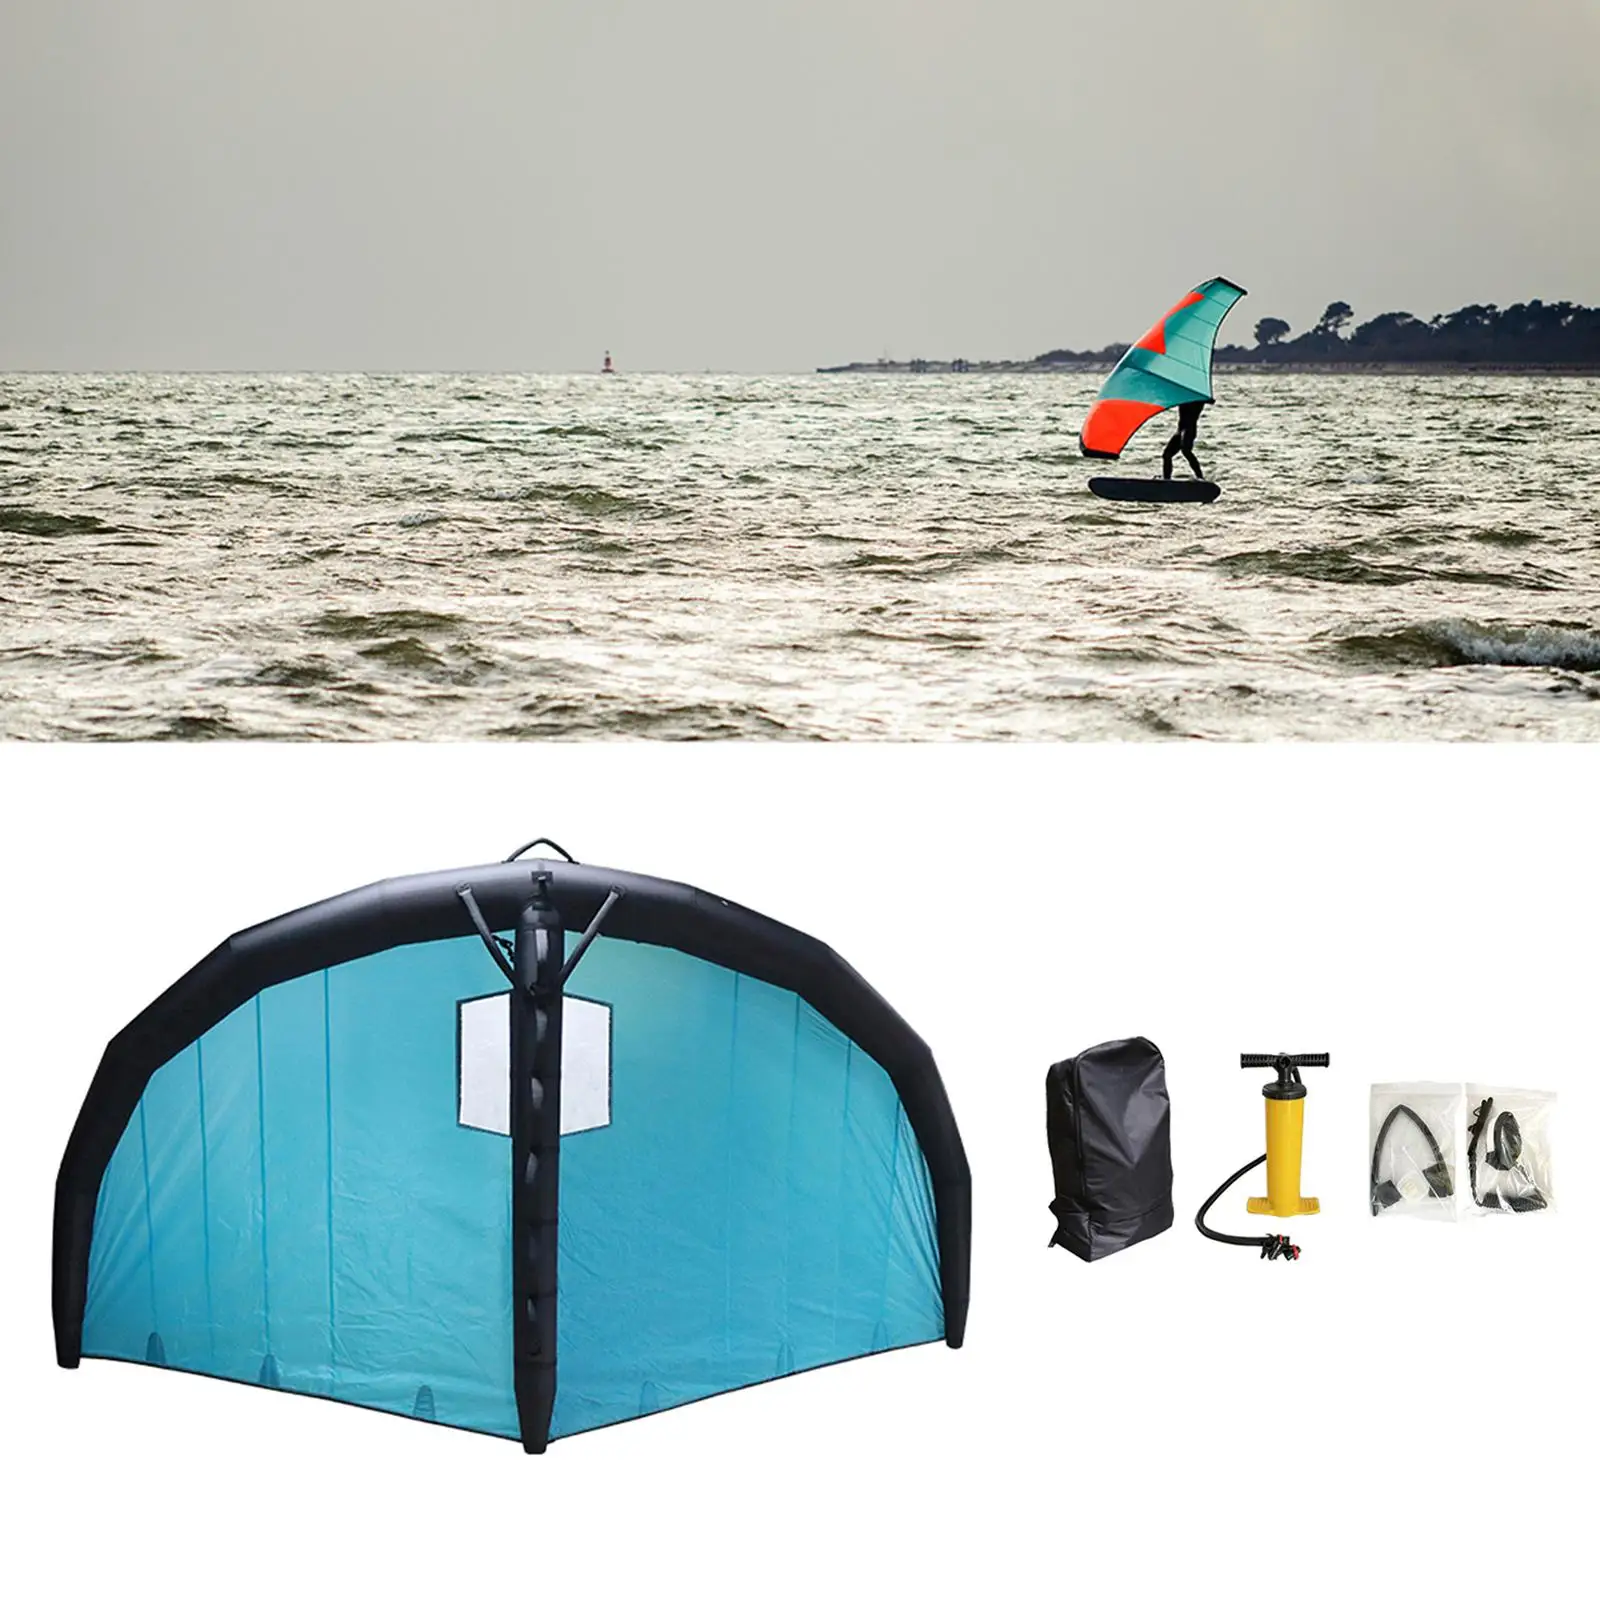 Inflatable Foil Powerful Hydrofoil Surfing Wing for Surfing Ski Windsurfing